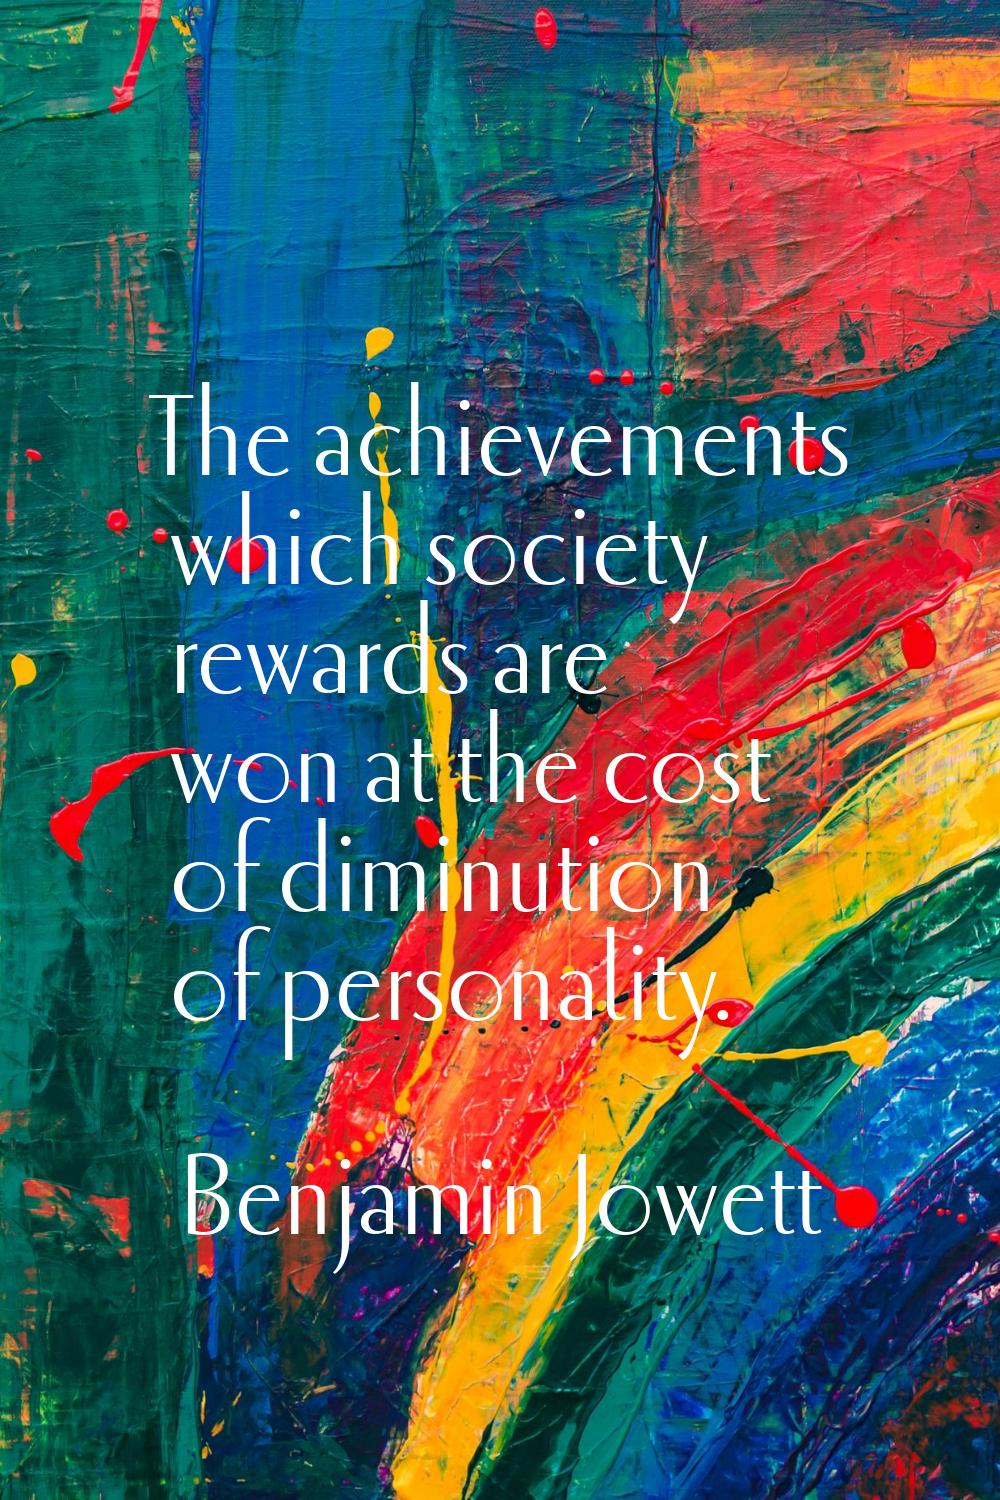 The achievements which society rewards are won at the cost of diminution of personality.